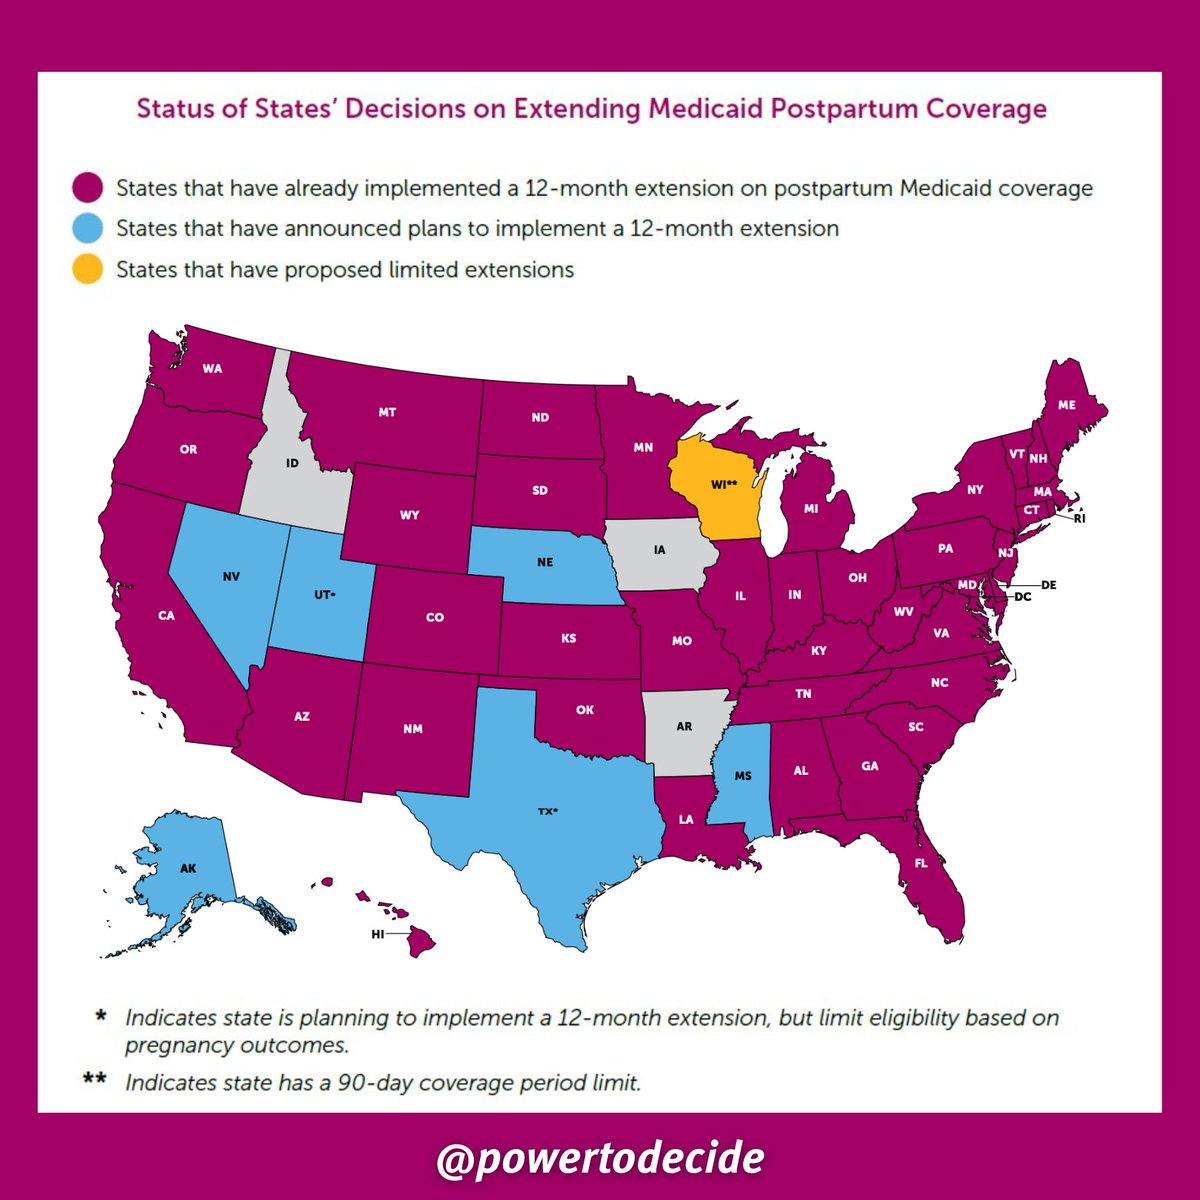 Extending postpartum #Medicaid coverage to one year is an important step in improving maternal health outcomes—a core component of reproductive well-being! Check out the full factsheet now: powertodecide.org/what-we-do/inf…